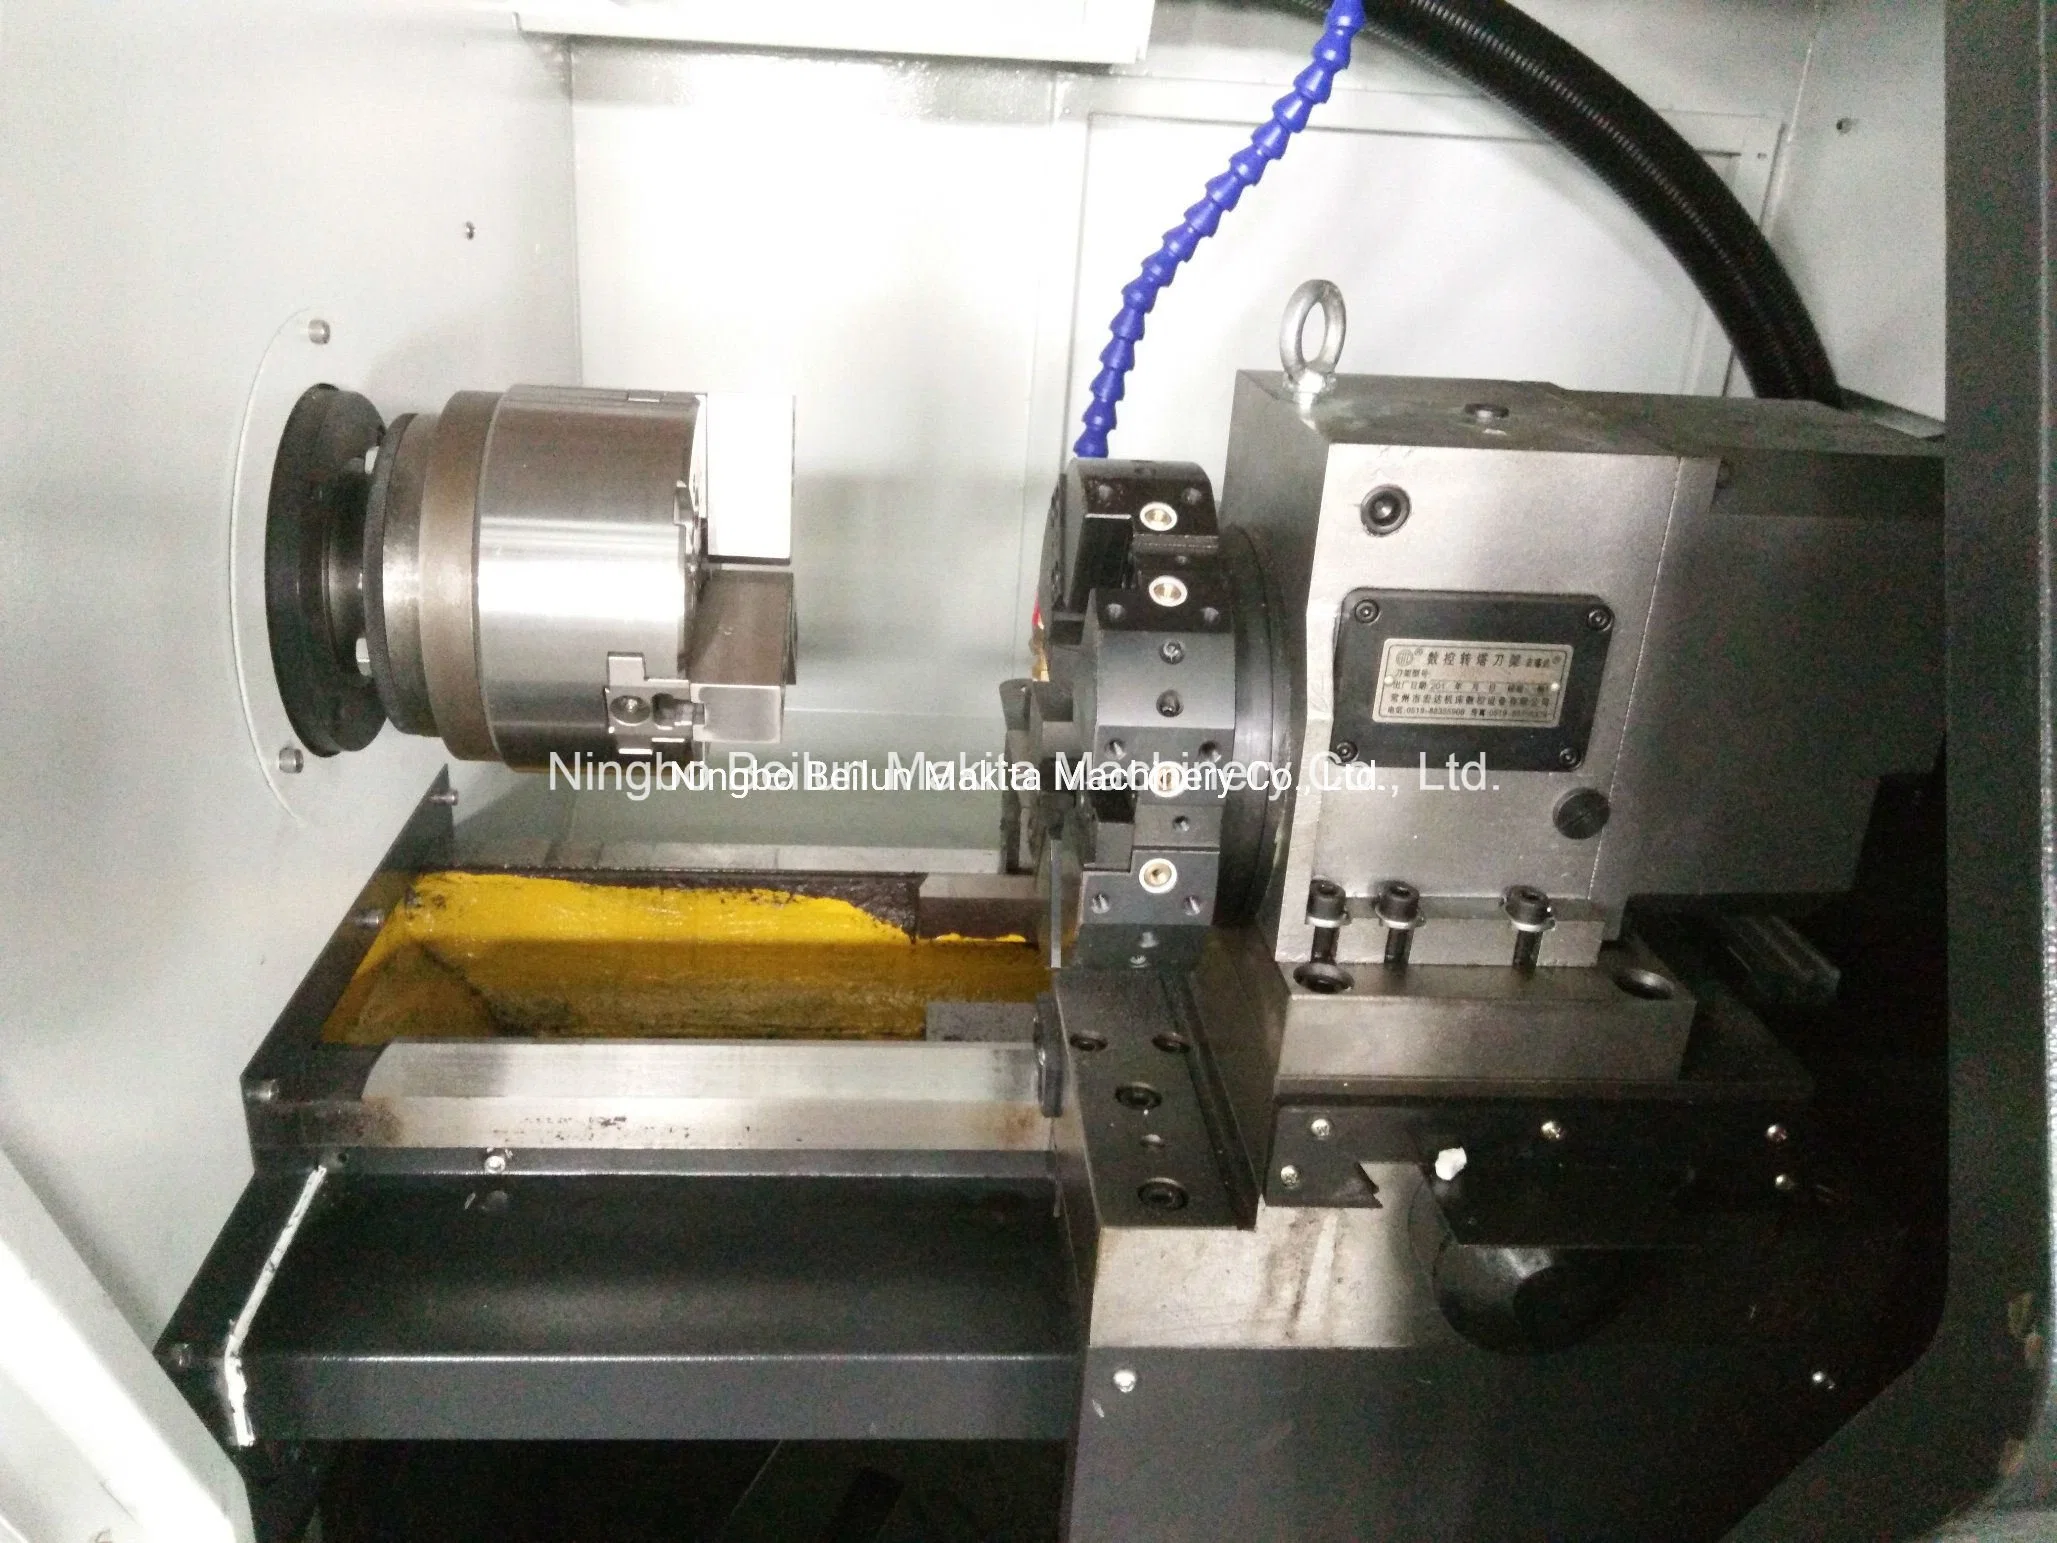 Economic Horizontal Flat Bed Metal Cutting with Competitive Price CNC Lathe